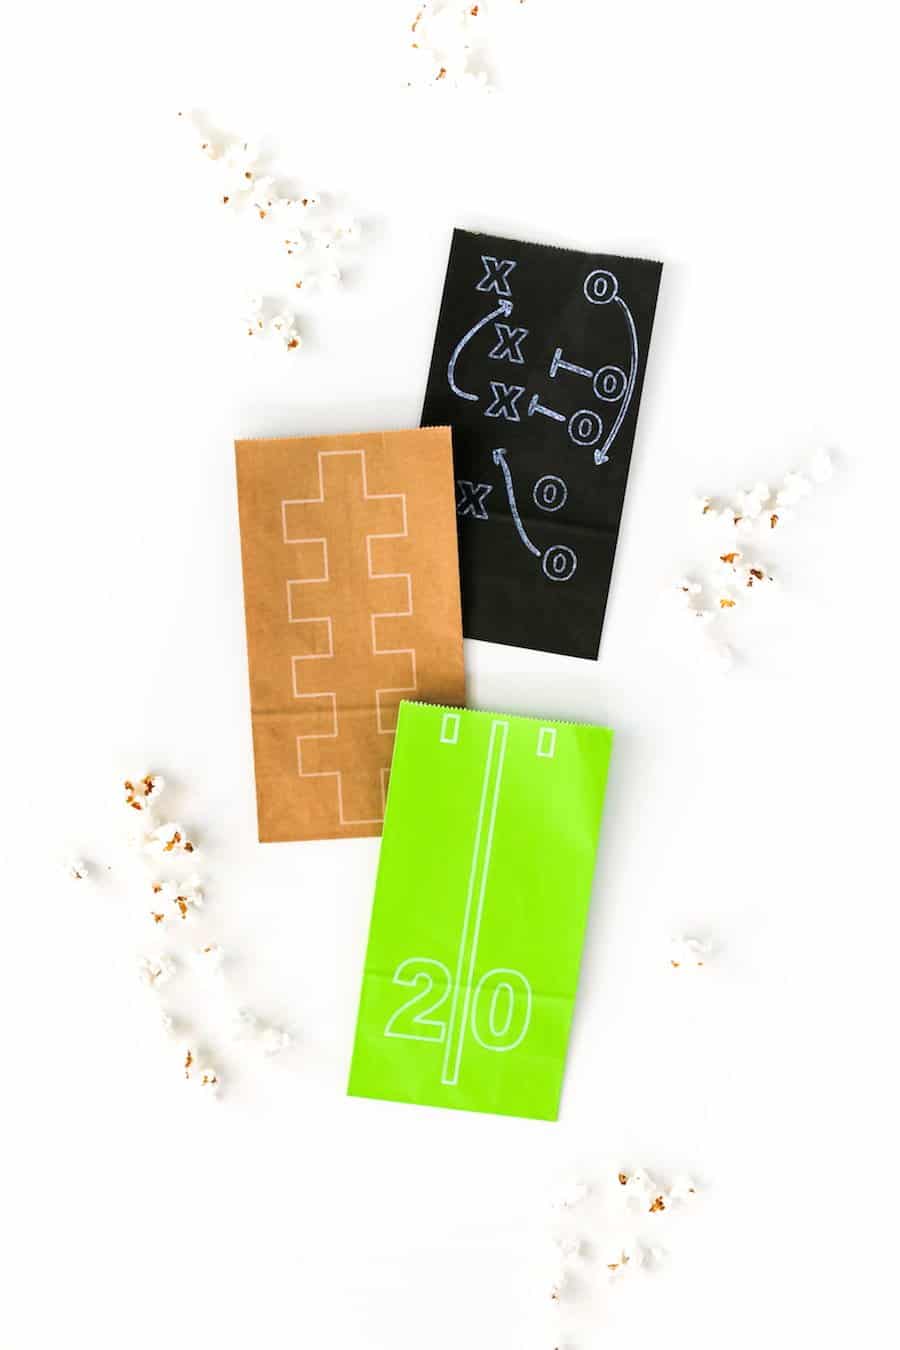 DIY Superbowl Popcorn Treat Bags made with the Cricut, Football Party, DIY Football Party Decorations, Free Football Themed SVG Cut Files, Gameday, Football Popcorn, Cricut Cutting Machine, Cricut DIY, Salty Canary